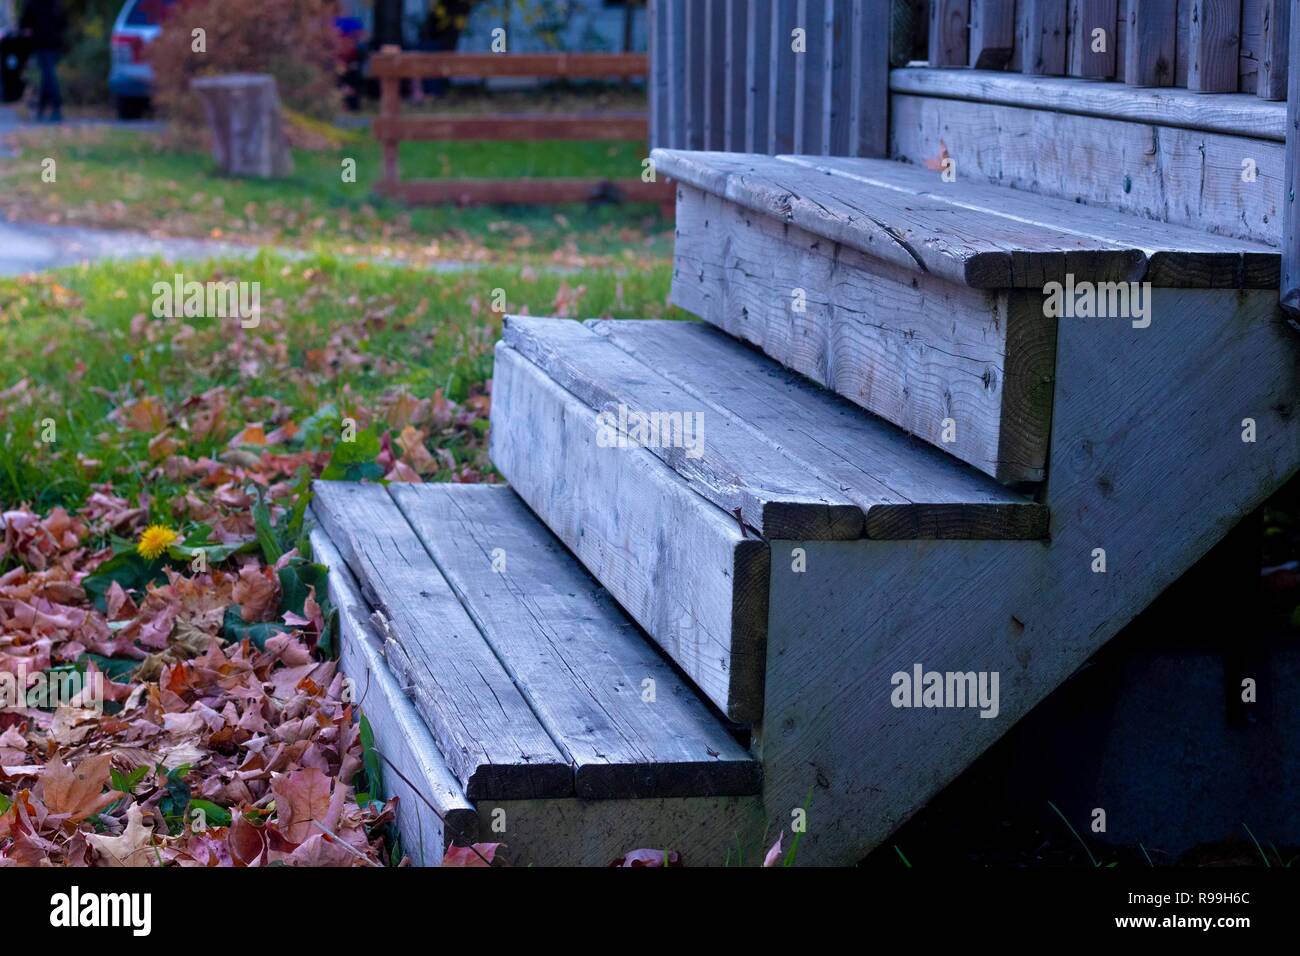 Dead leaves by old wooden stairs in fall setting. Stock Photo